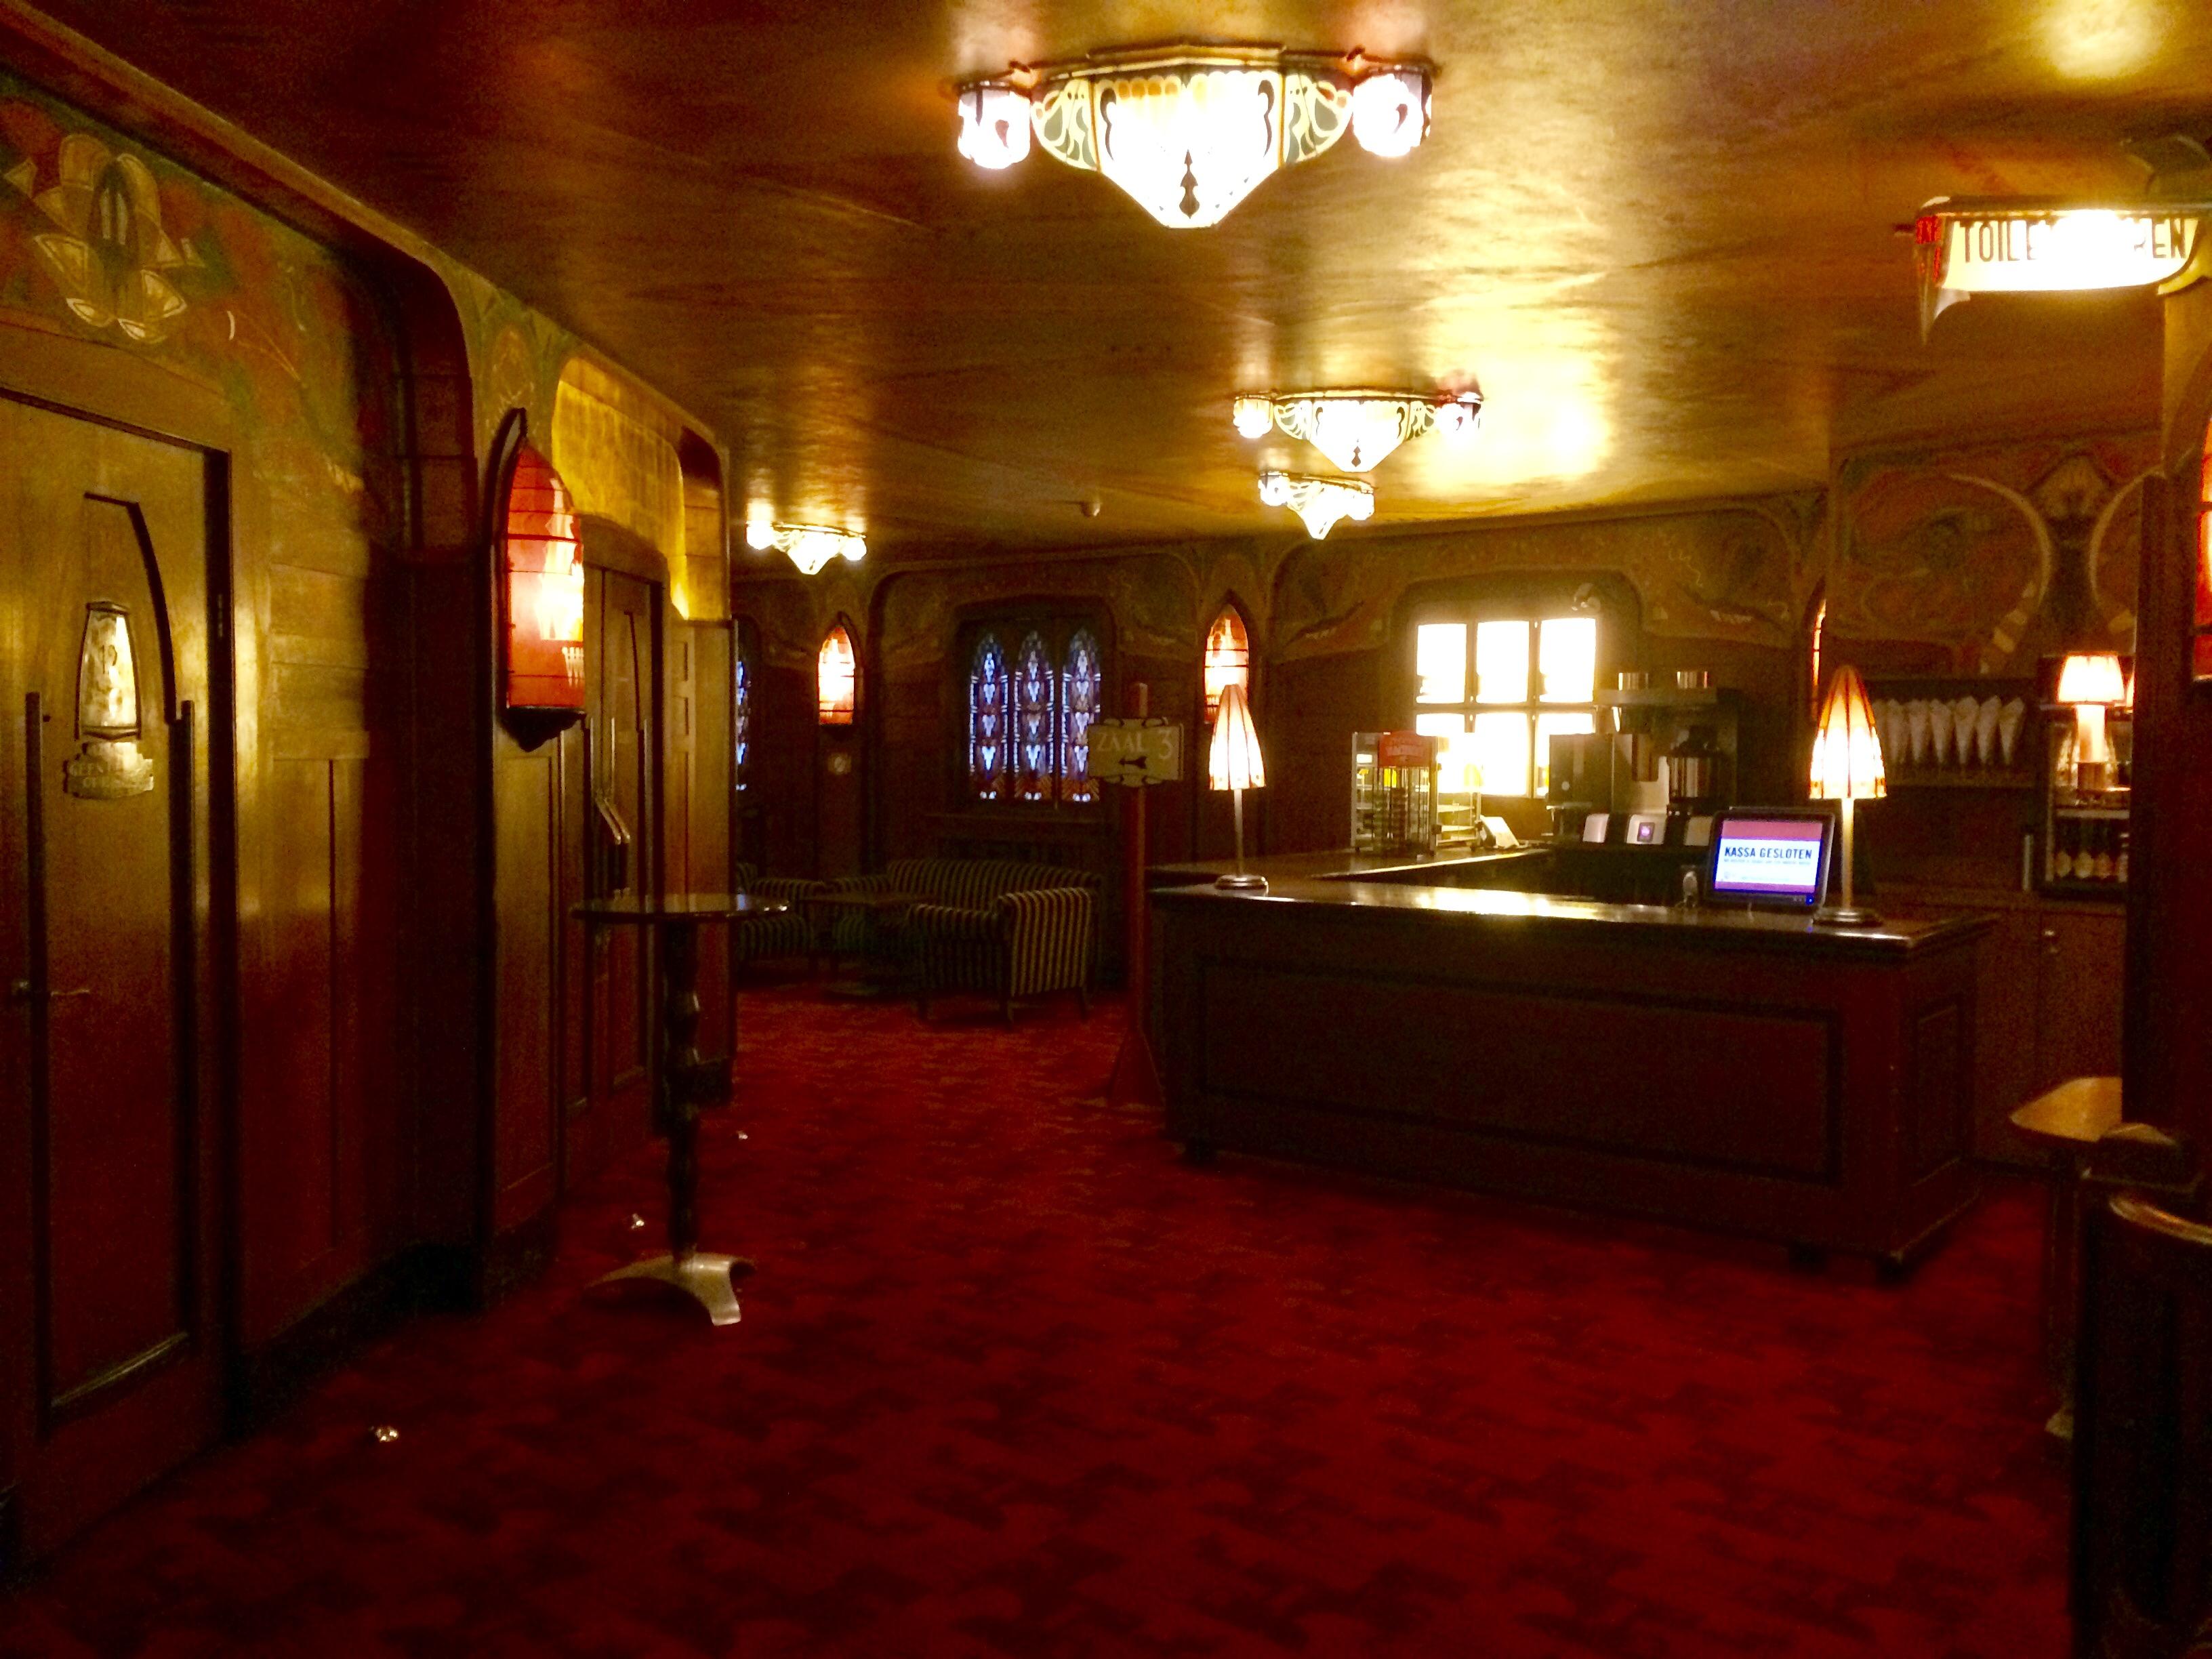 Cover image of this place Pathé Tuschinski